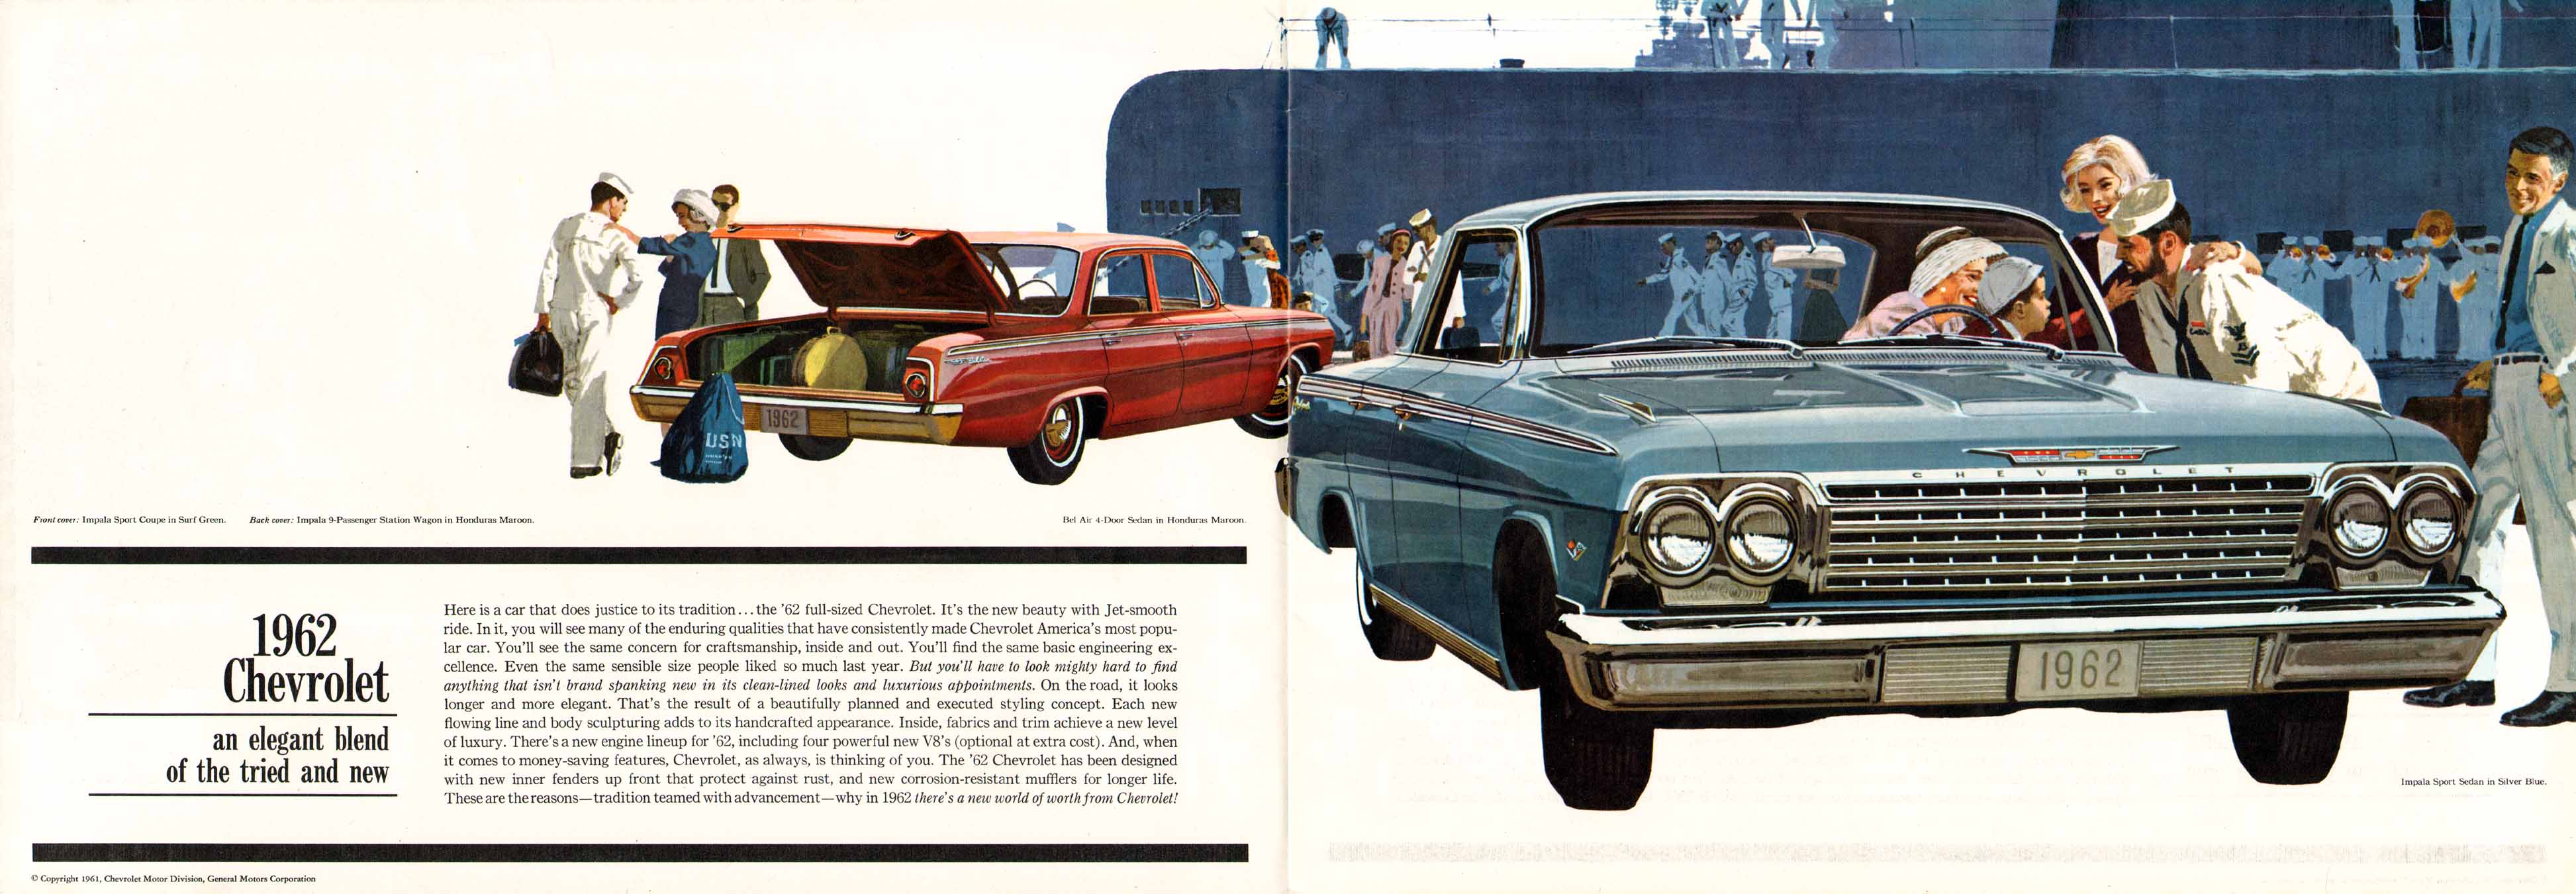 1962 Chevrolet Full-Size Brochure Page 1